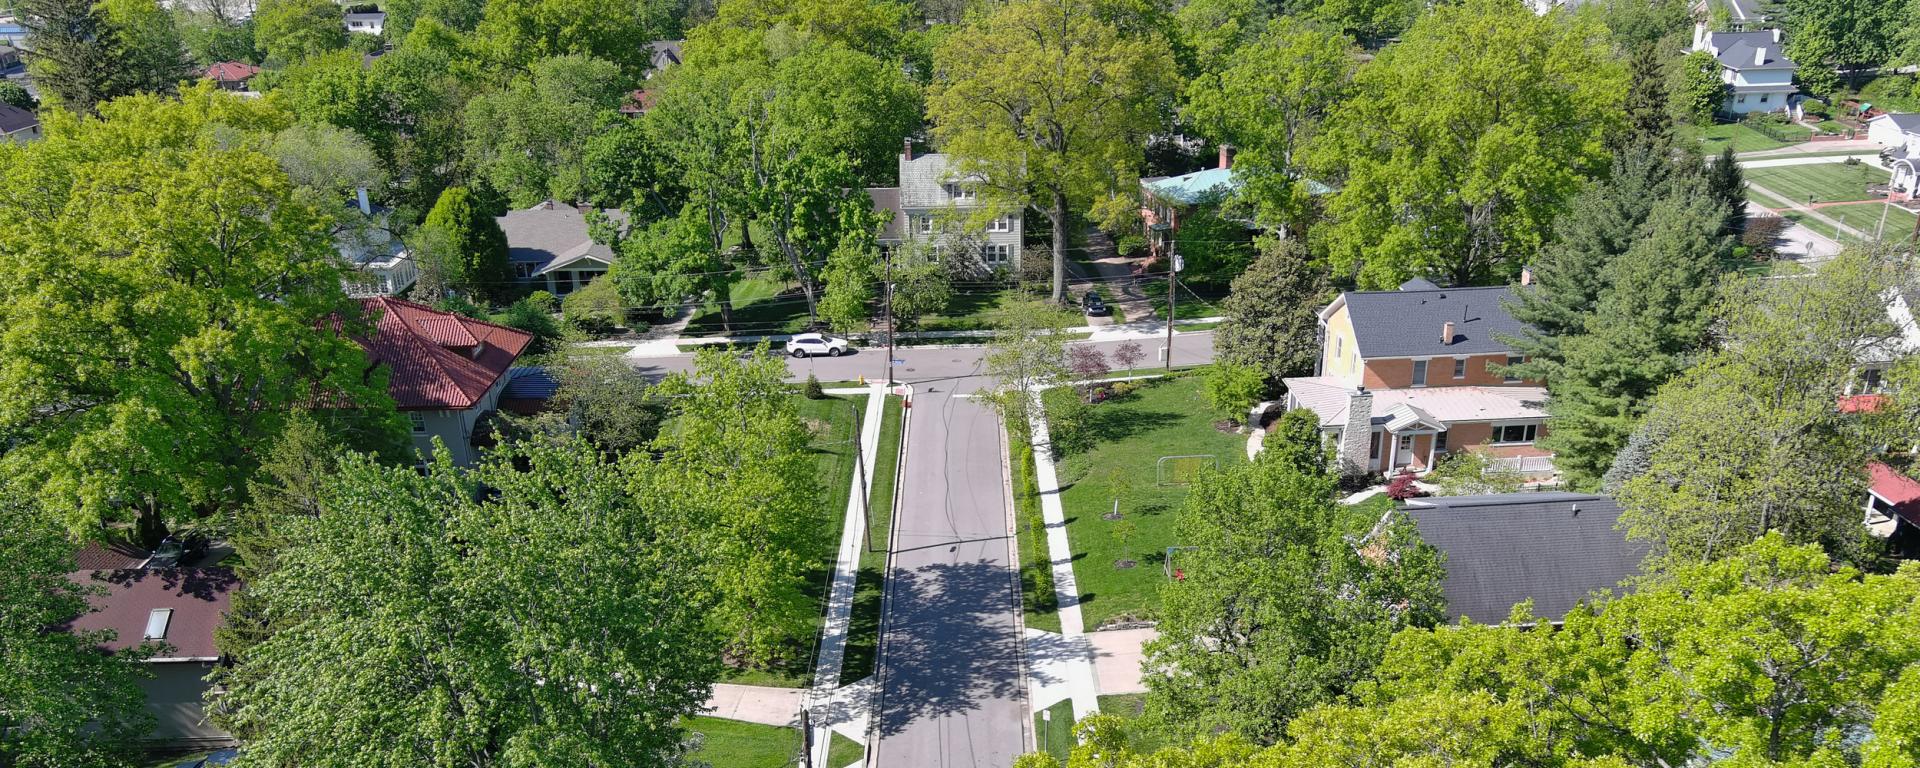 aerial photo of residential street and green trees